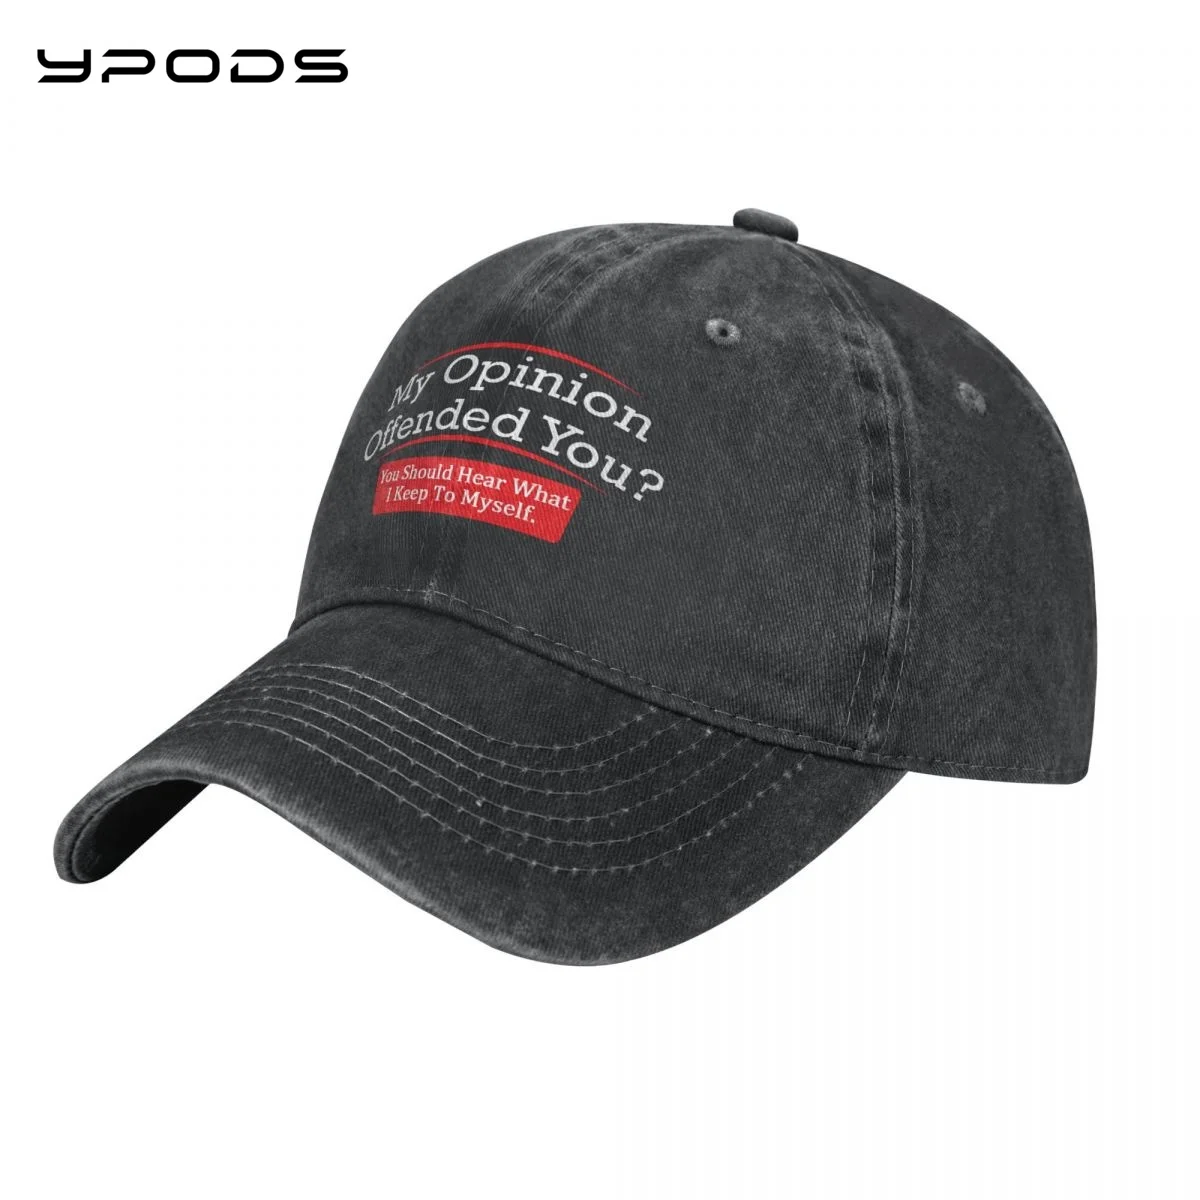 

My Opinion Offended Baseball Caps for Men Women Vintage Washed Cotton Dad Hats Print Snapback Cap Hat